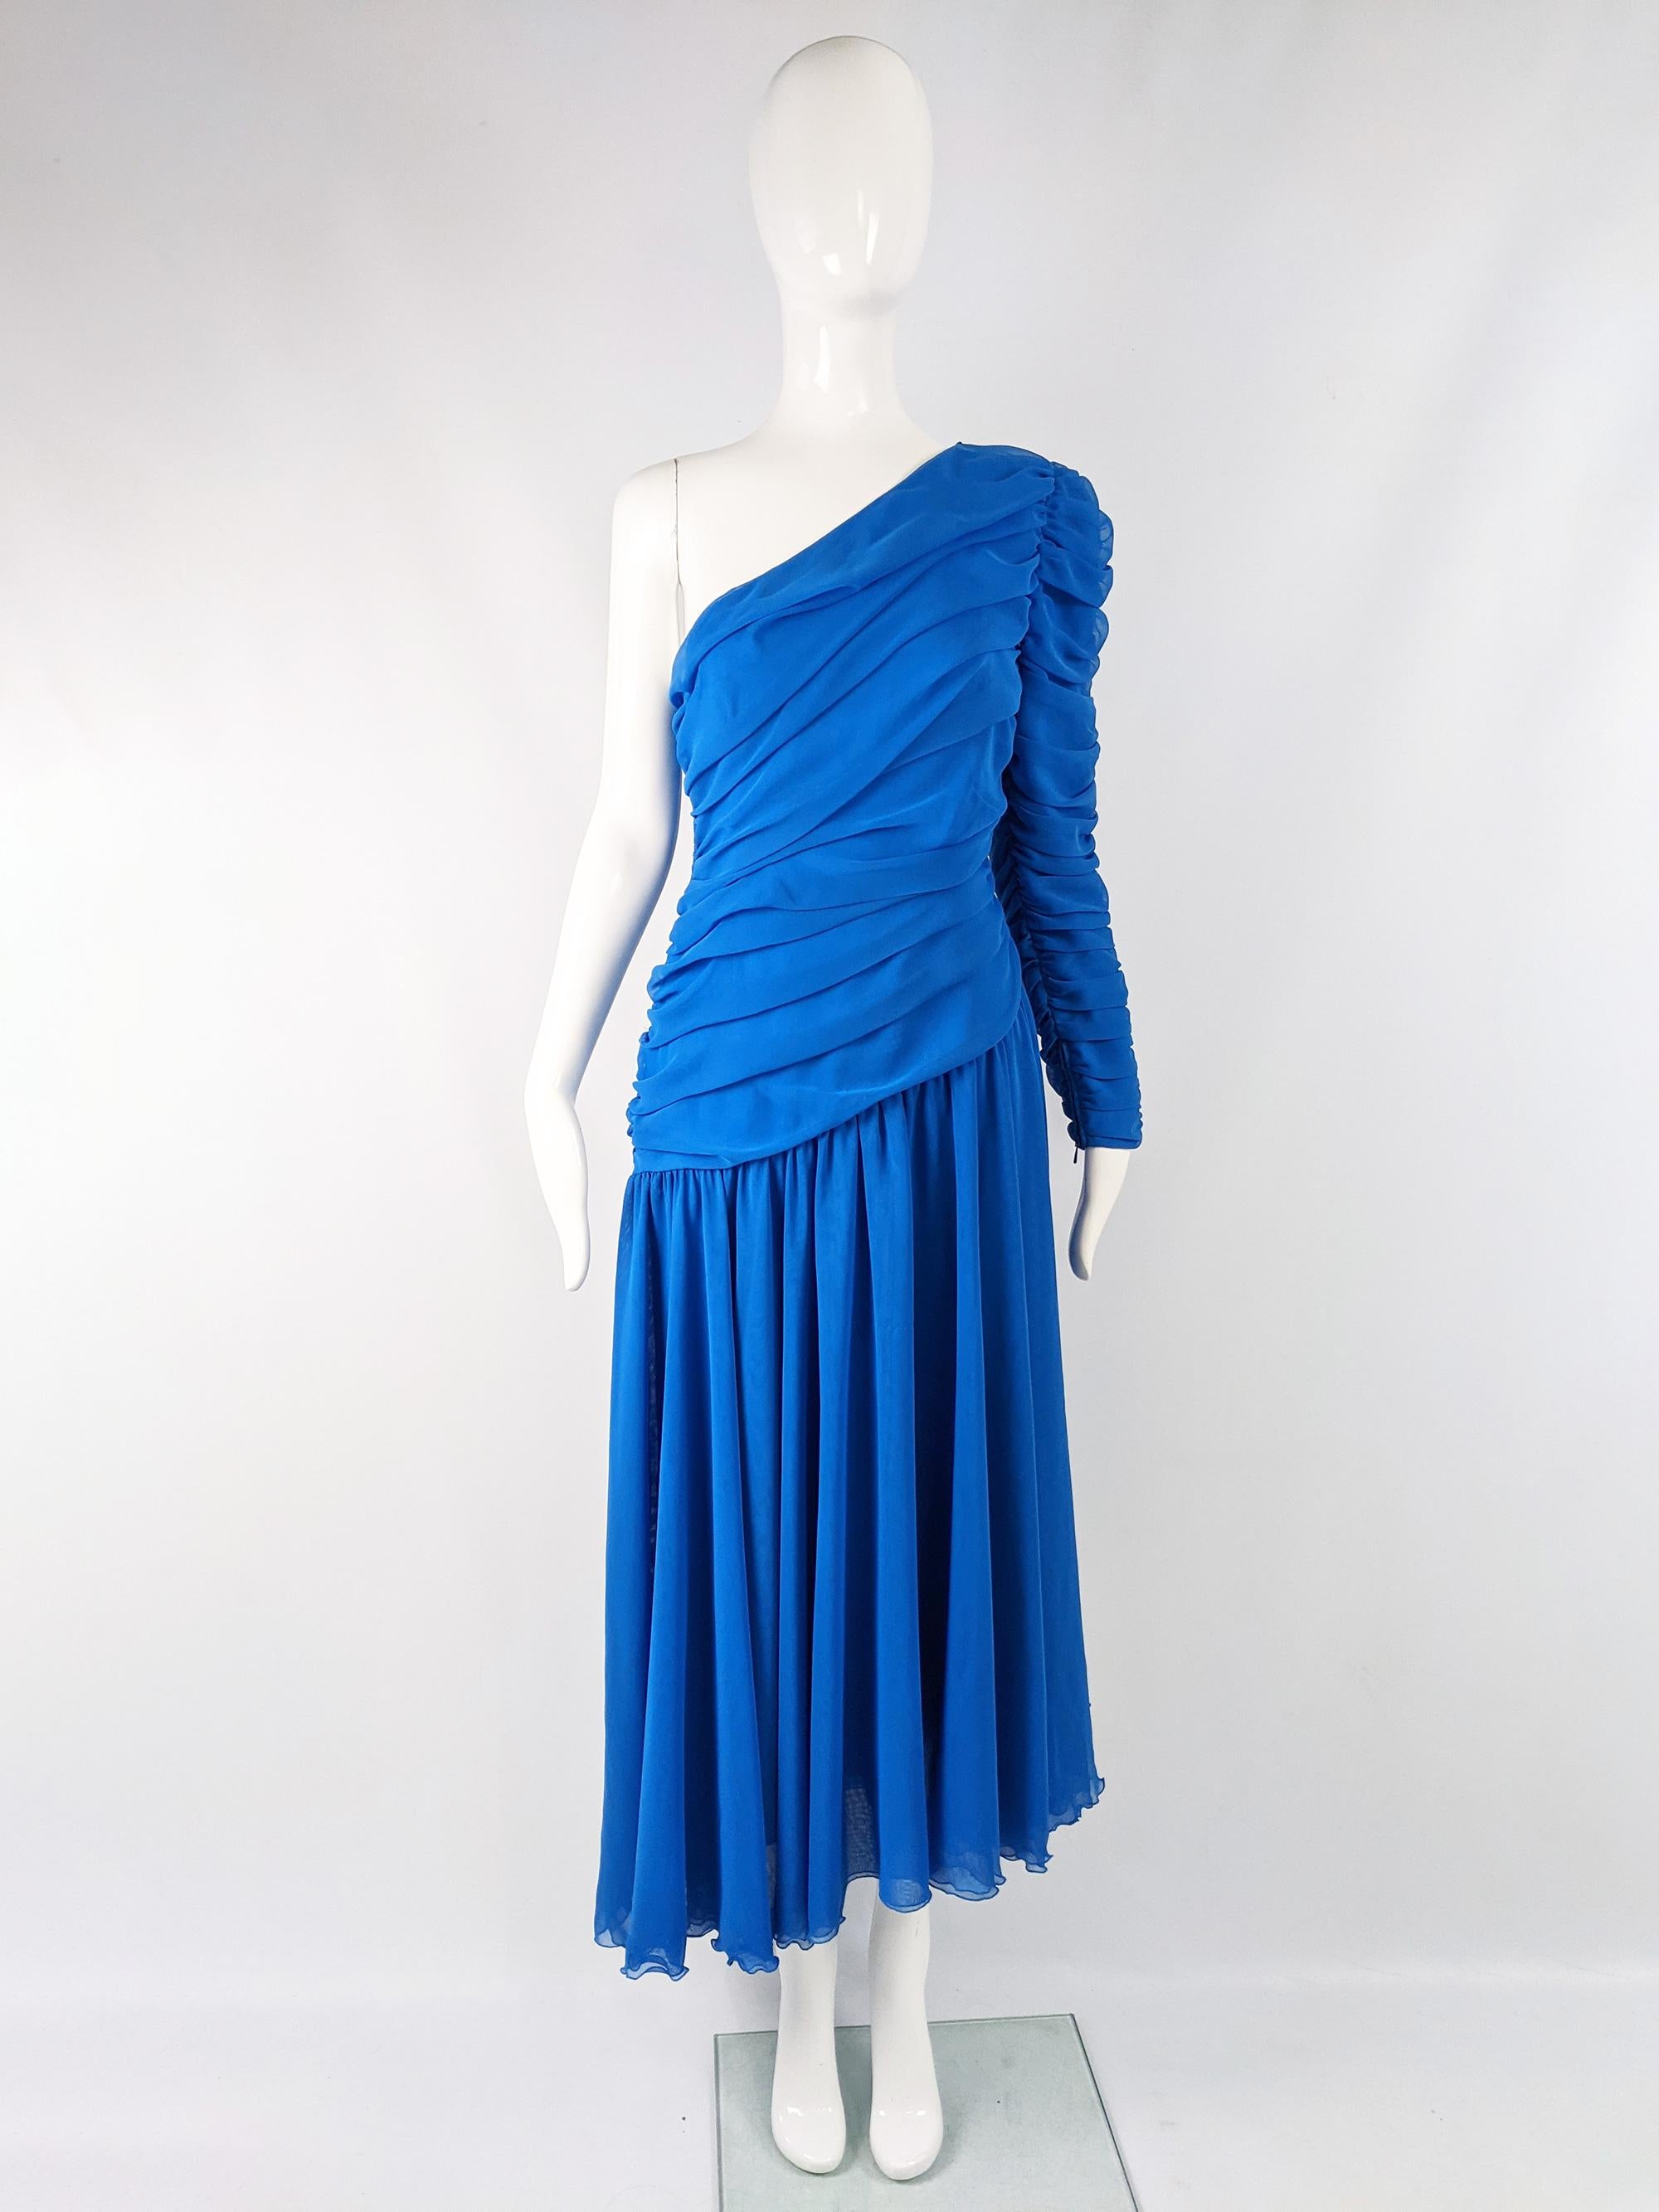 A beautiful vintage evening dress from the 80s by Parisian fashion designer, Louis Feraud. In a blue ruched chiffon with one sleeve, an asymmetrical cut and a gathered skirt.

Size: Marked vintage 42 but fits like a modern womens UK 10/ US 6/ EU 38.